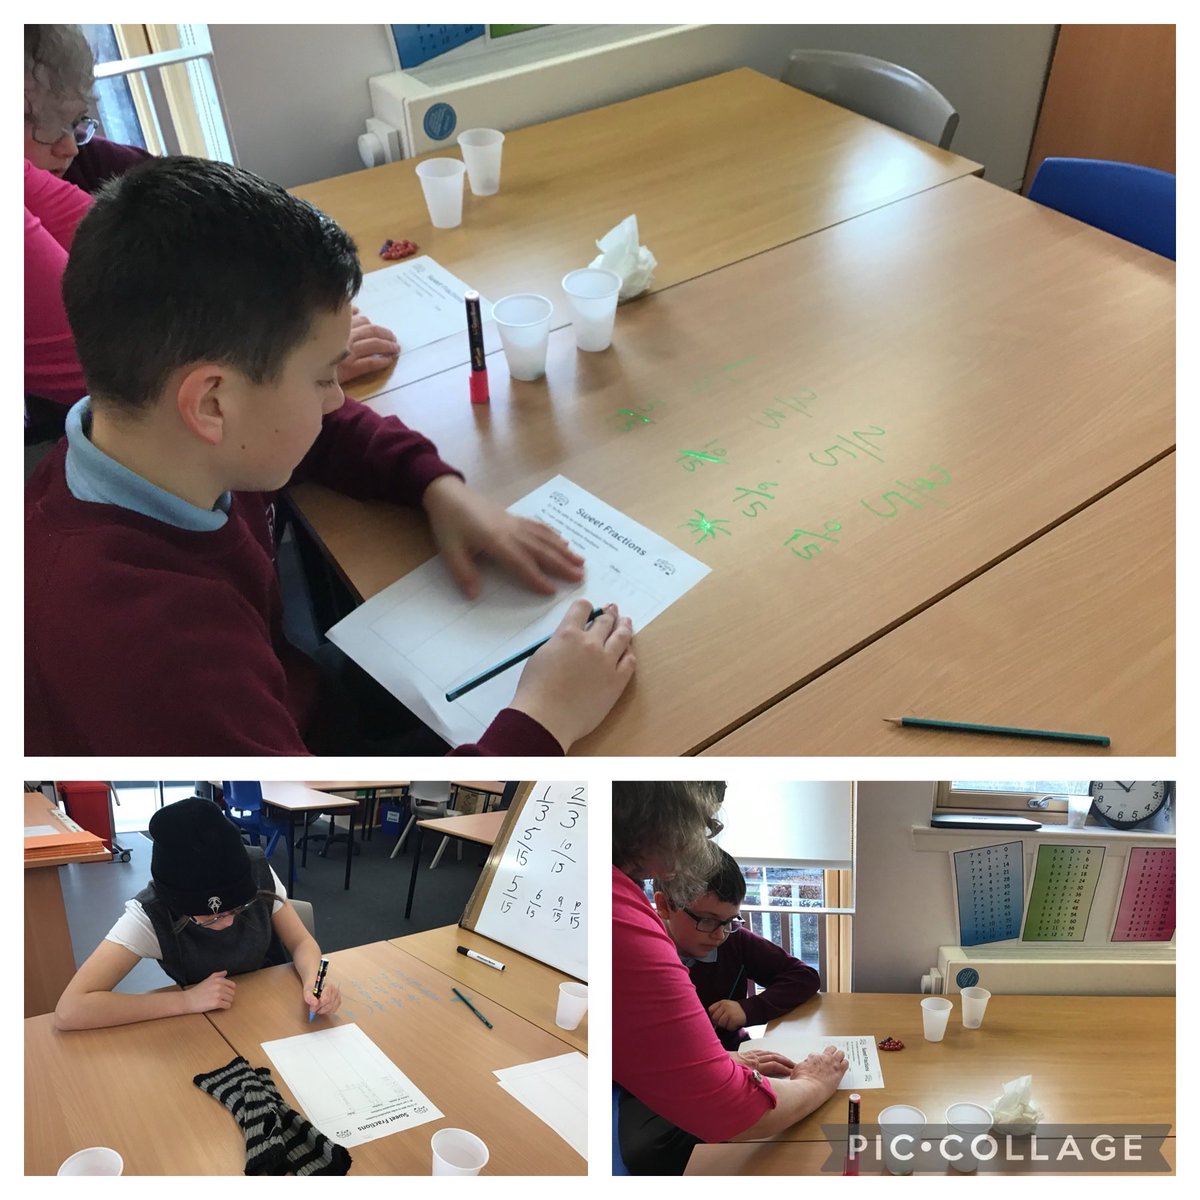 P5/6/7 have been learning all about fractions this week! #itsSLC